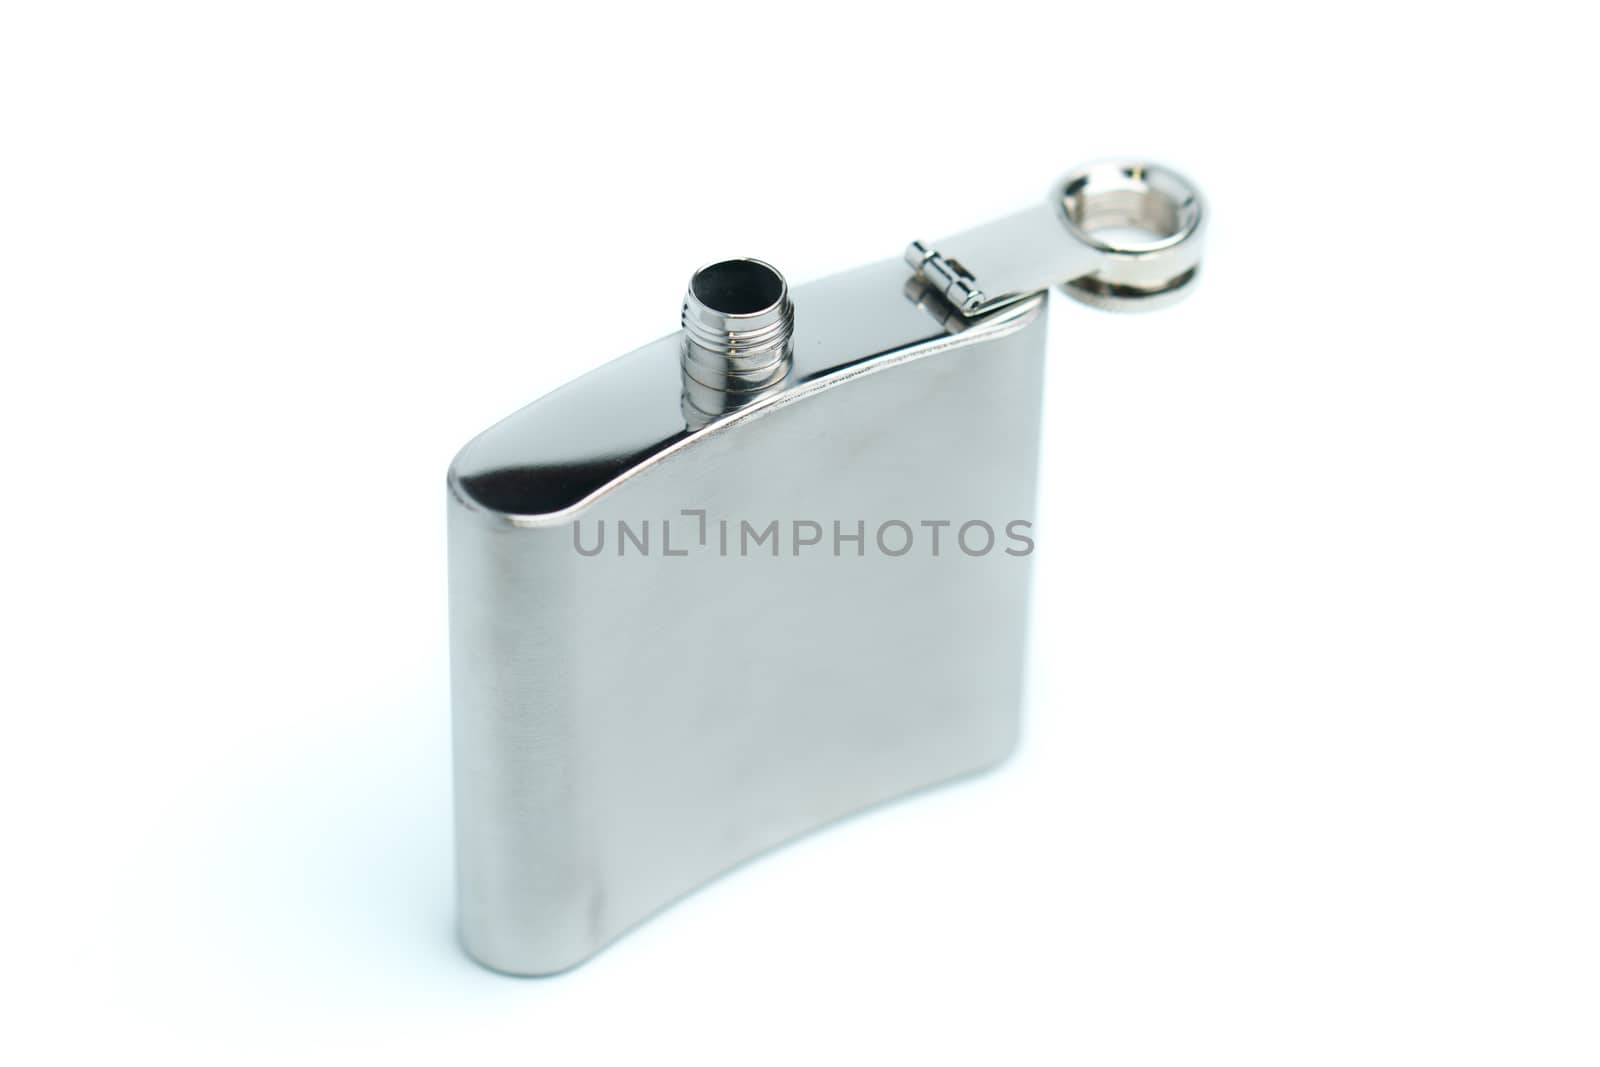 Stainless hip flask isolated on a white background by sirawit99